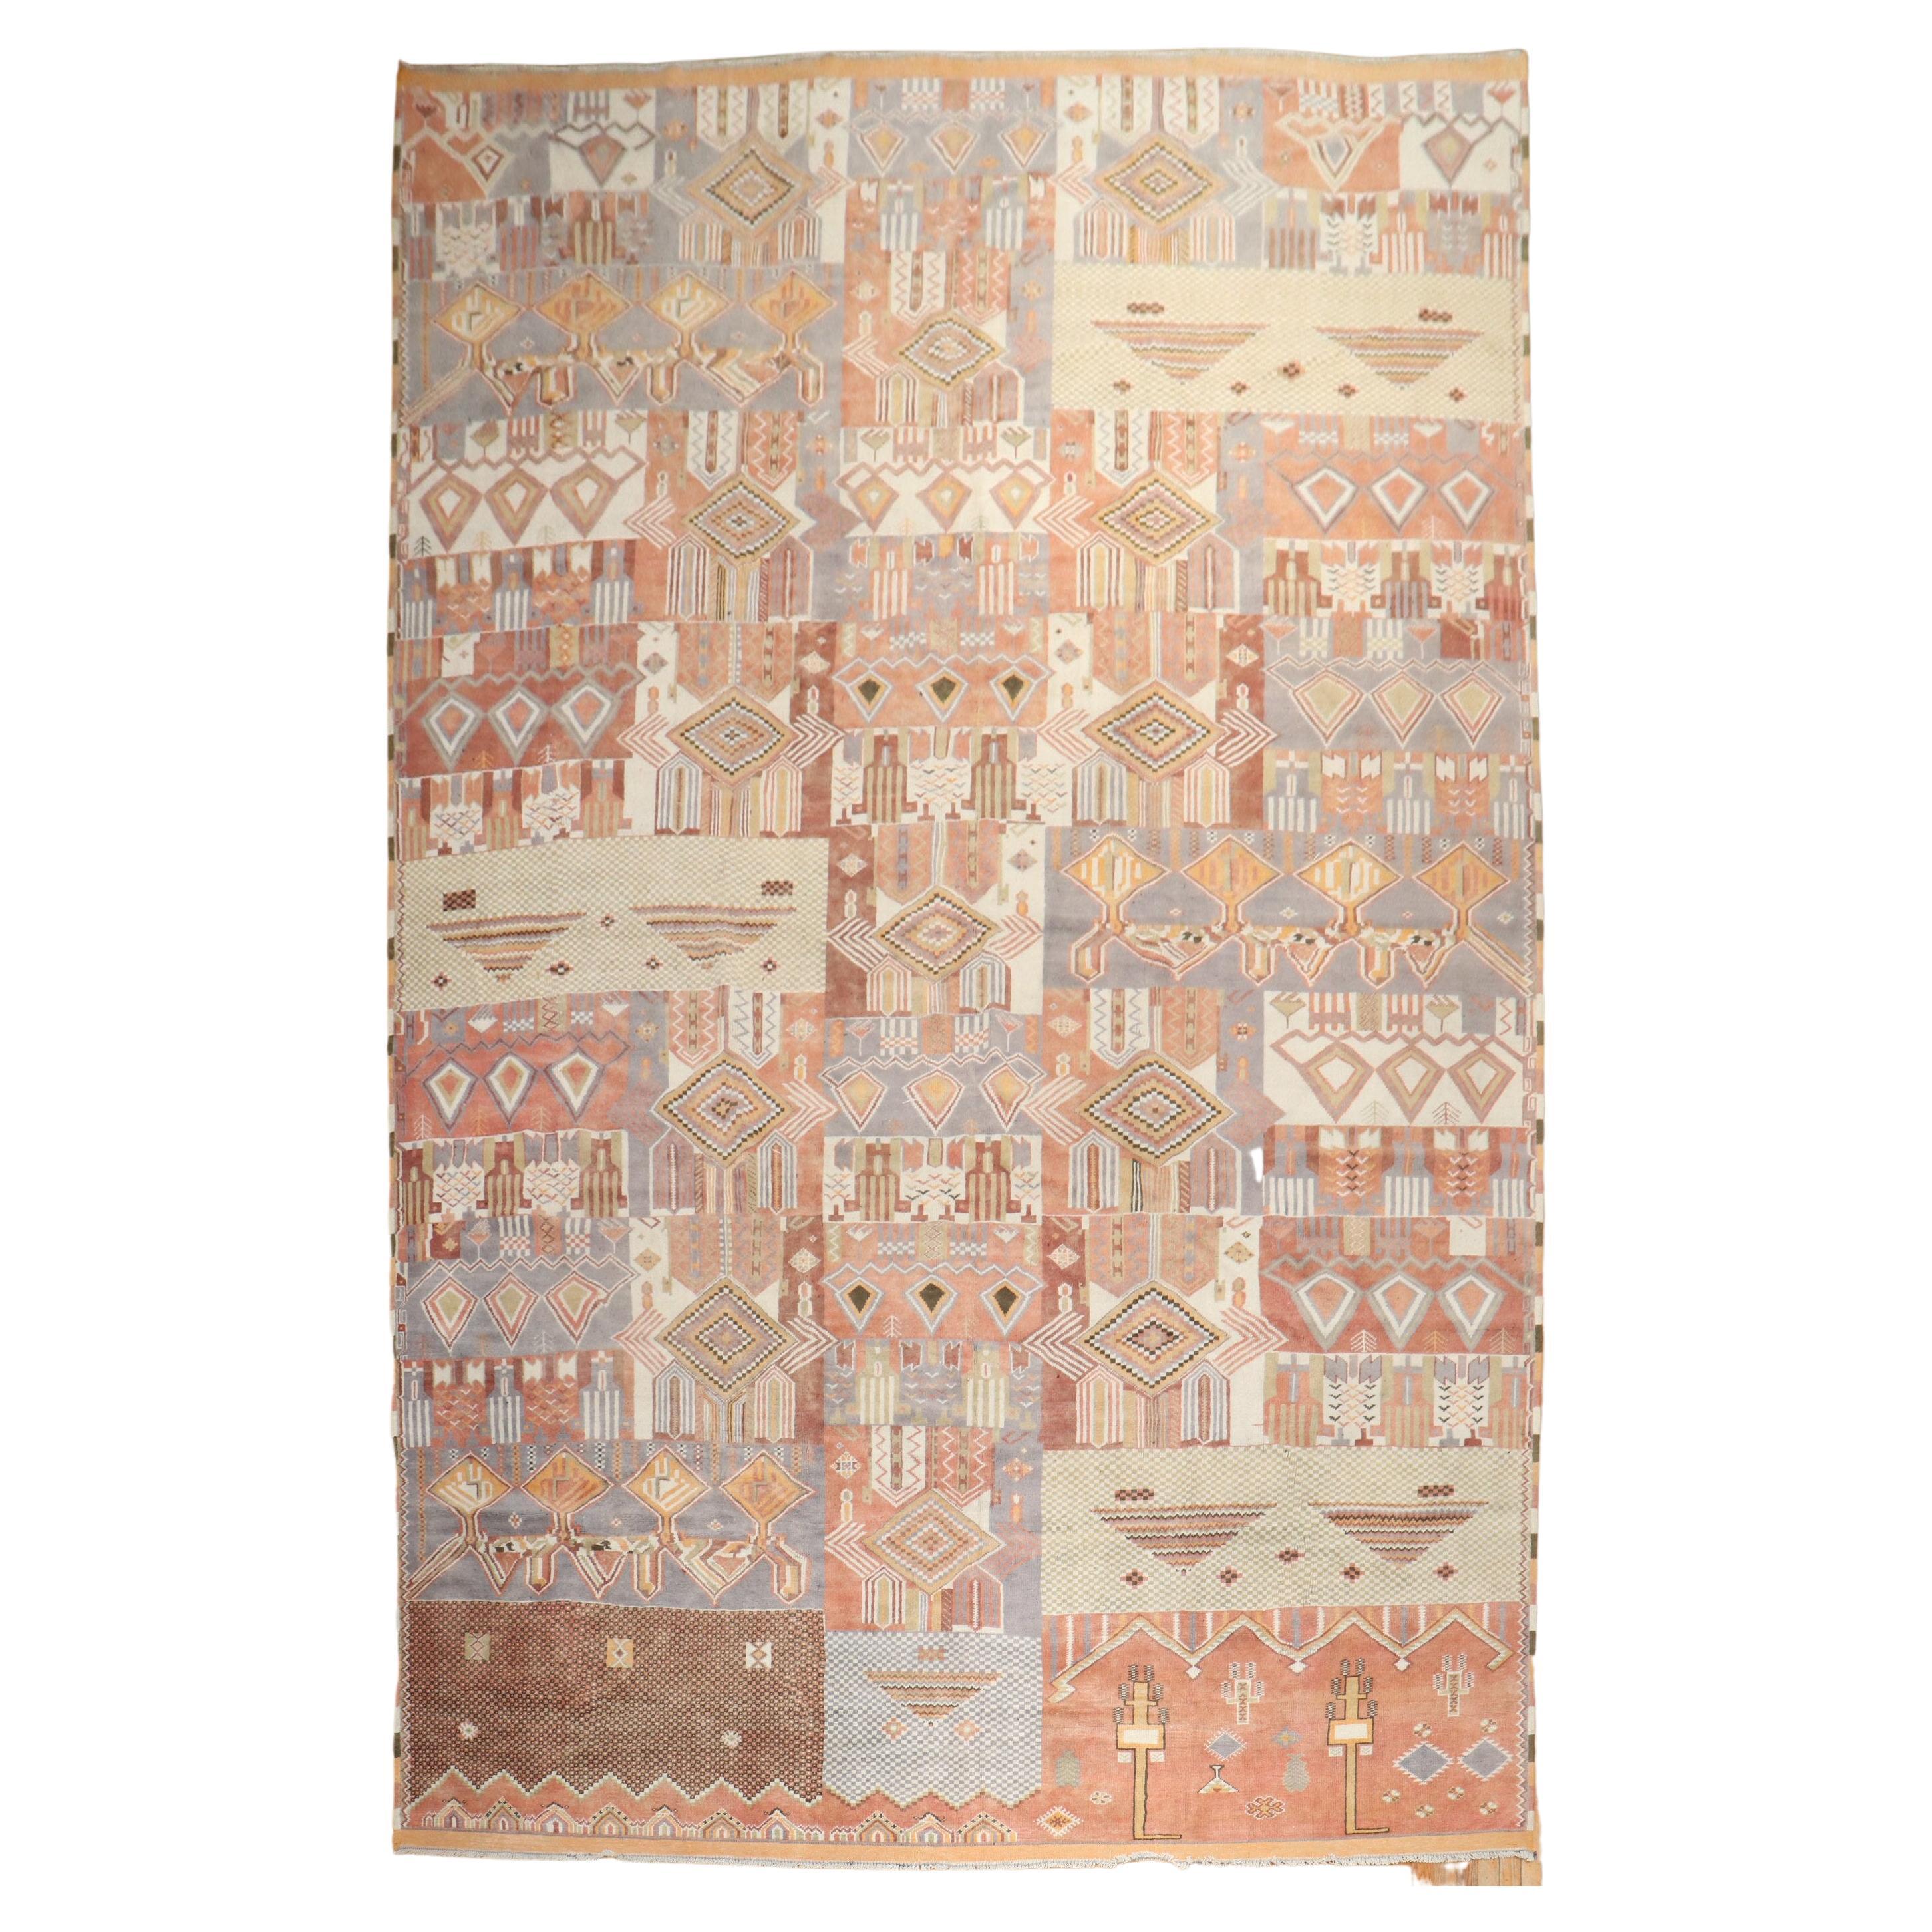 A whimsical oversize Moroccan Rug from the 3rd quarter of the 20th century.

Measures: 9'9'' x 16'.